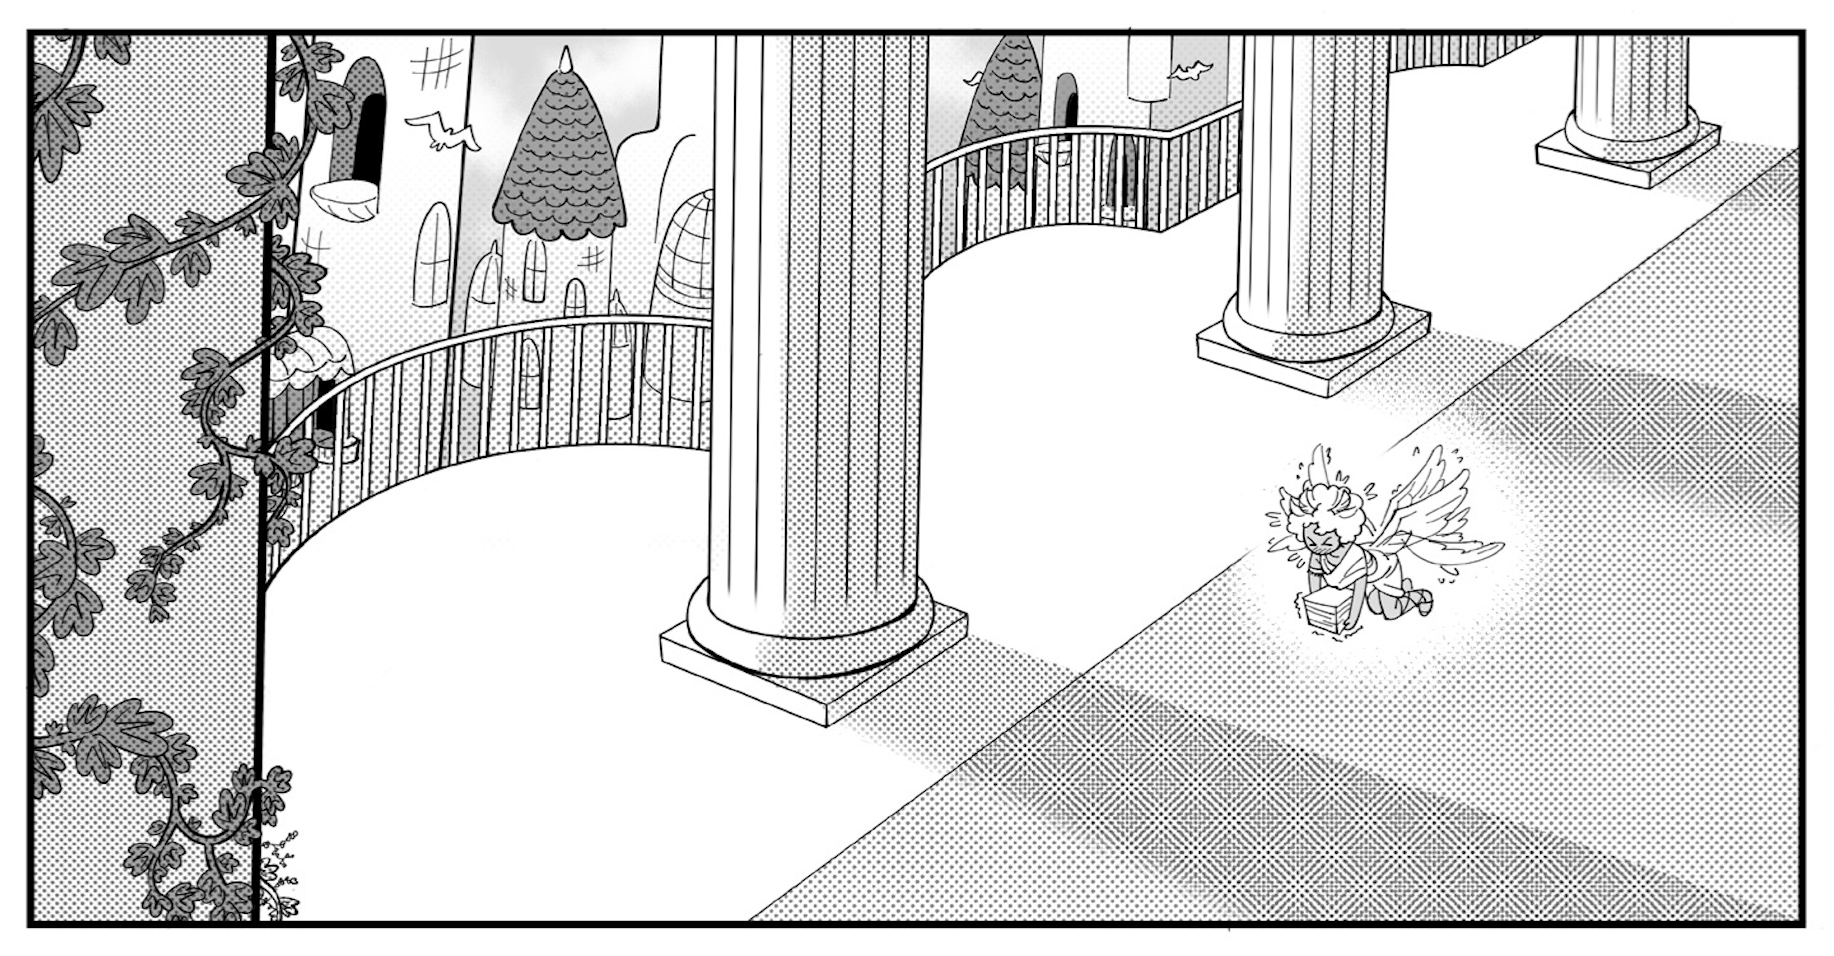 A black and white panel of the angel figure struggling to carry a stack of papers in an outdoor columned courtyard.